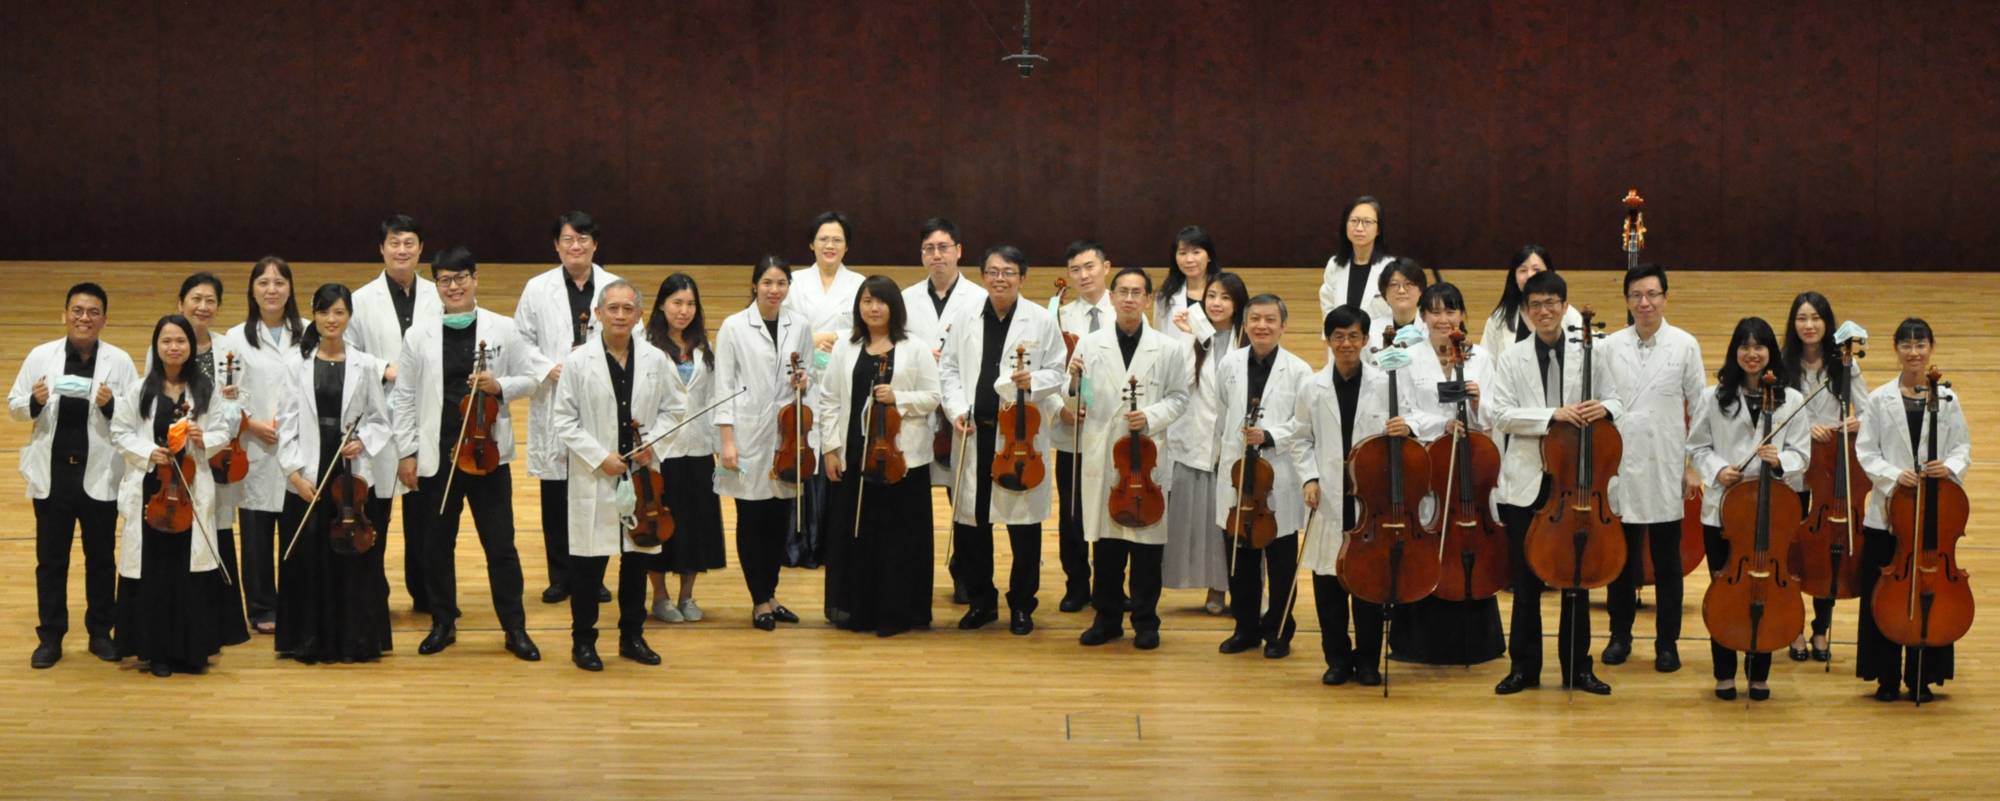 Physician's Chamber Orchestra of Taiwan 30th